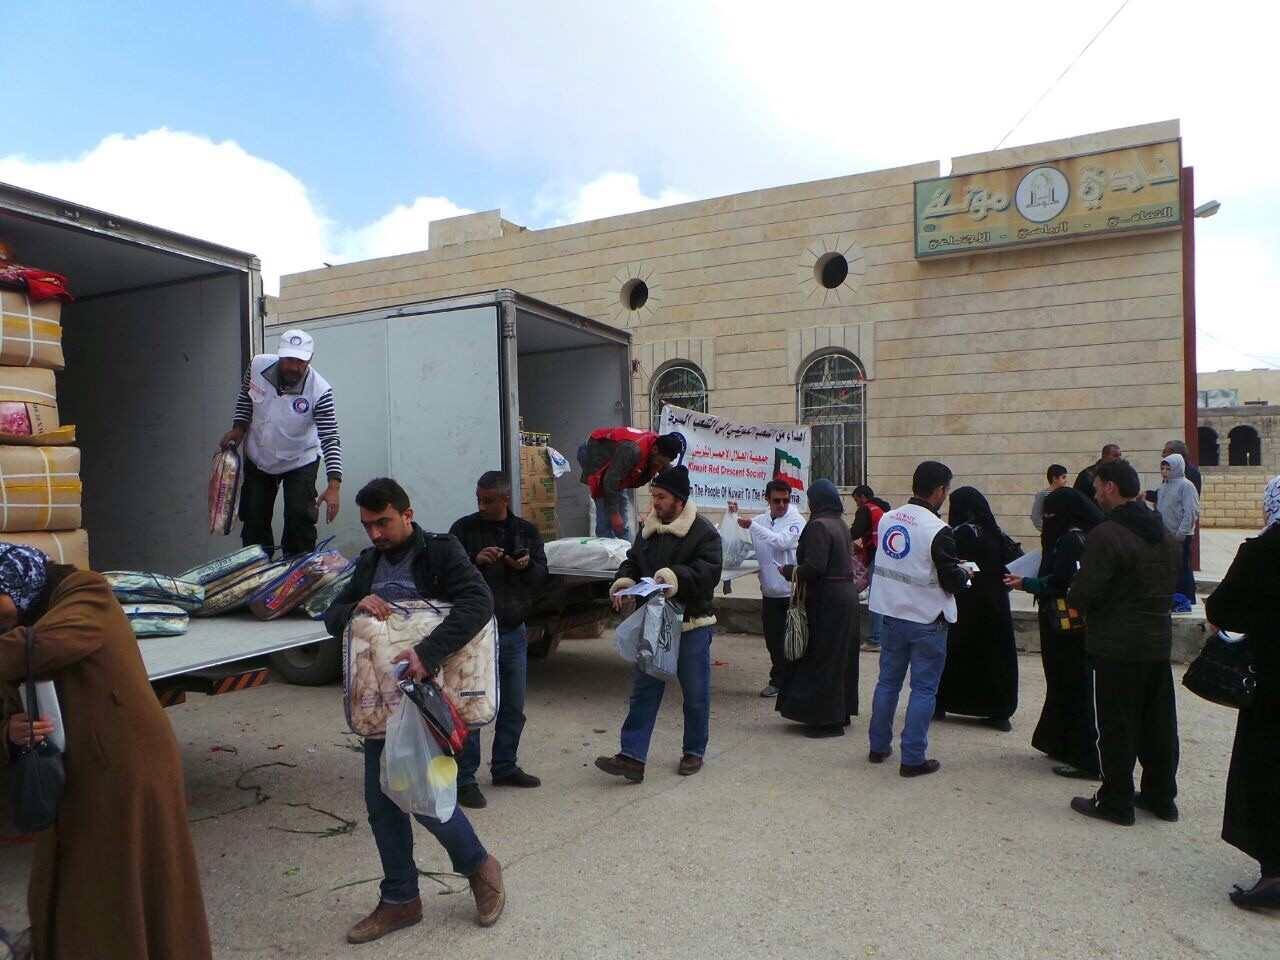 KRCS provides aid to Syrian refugees in Jordan